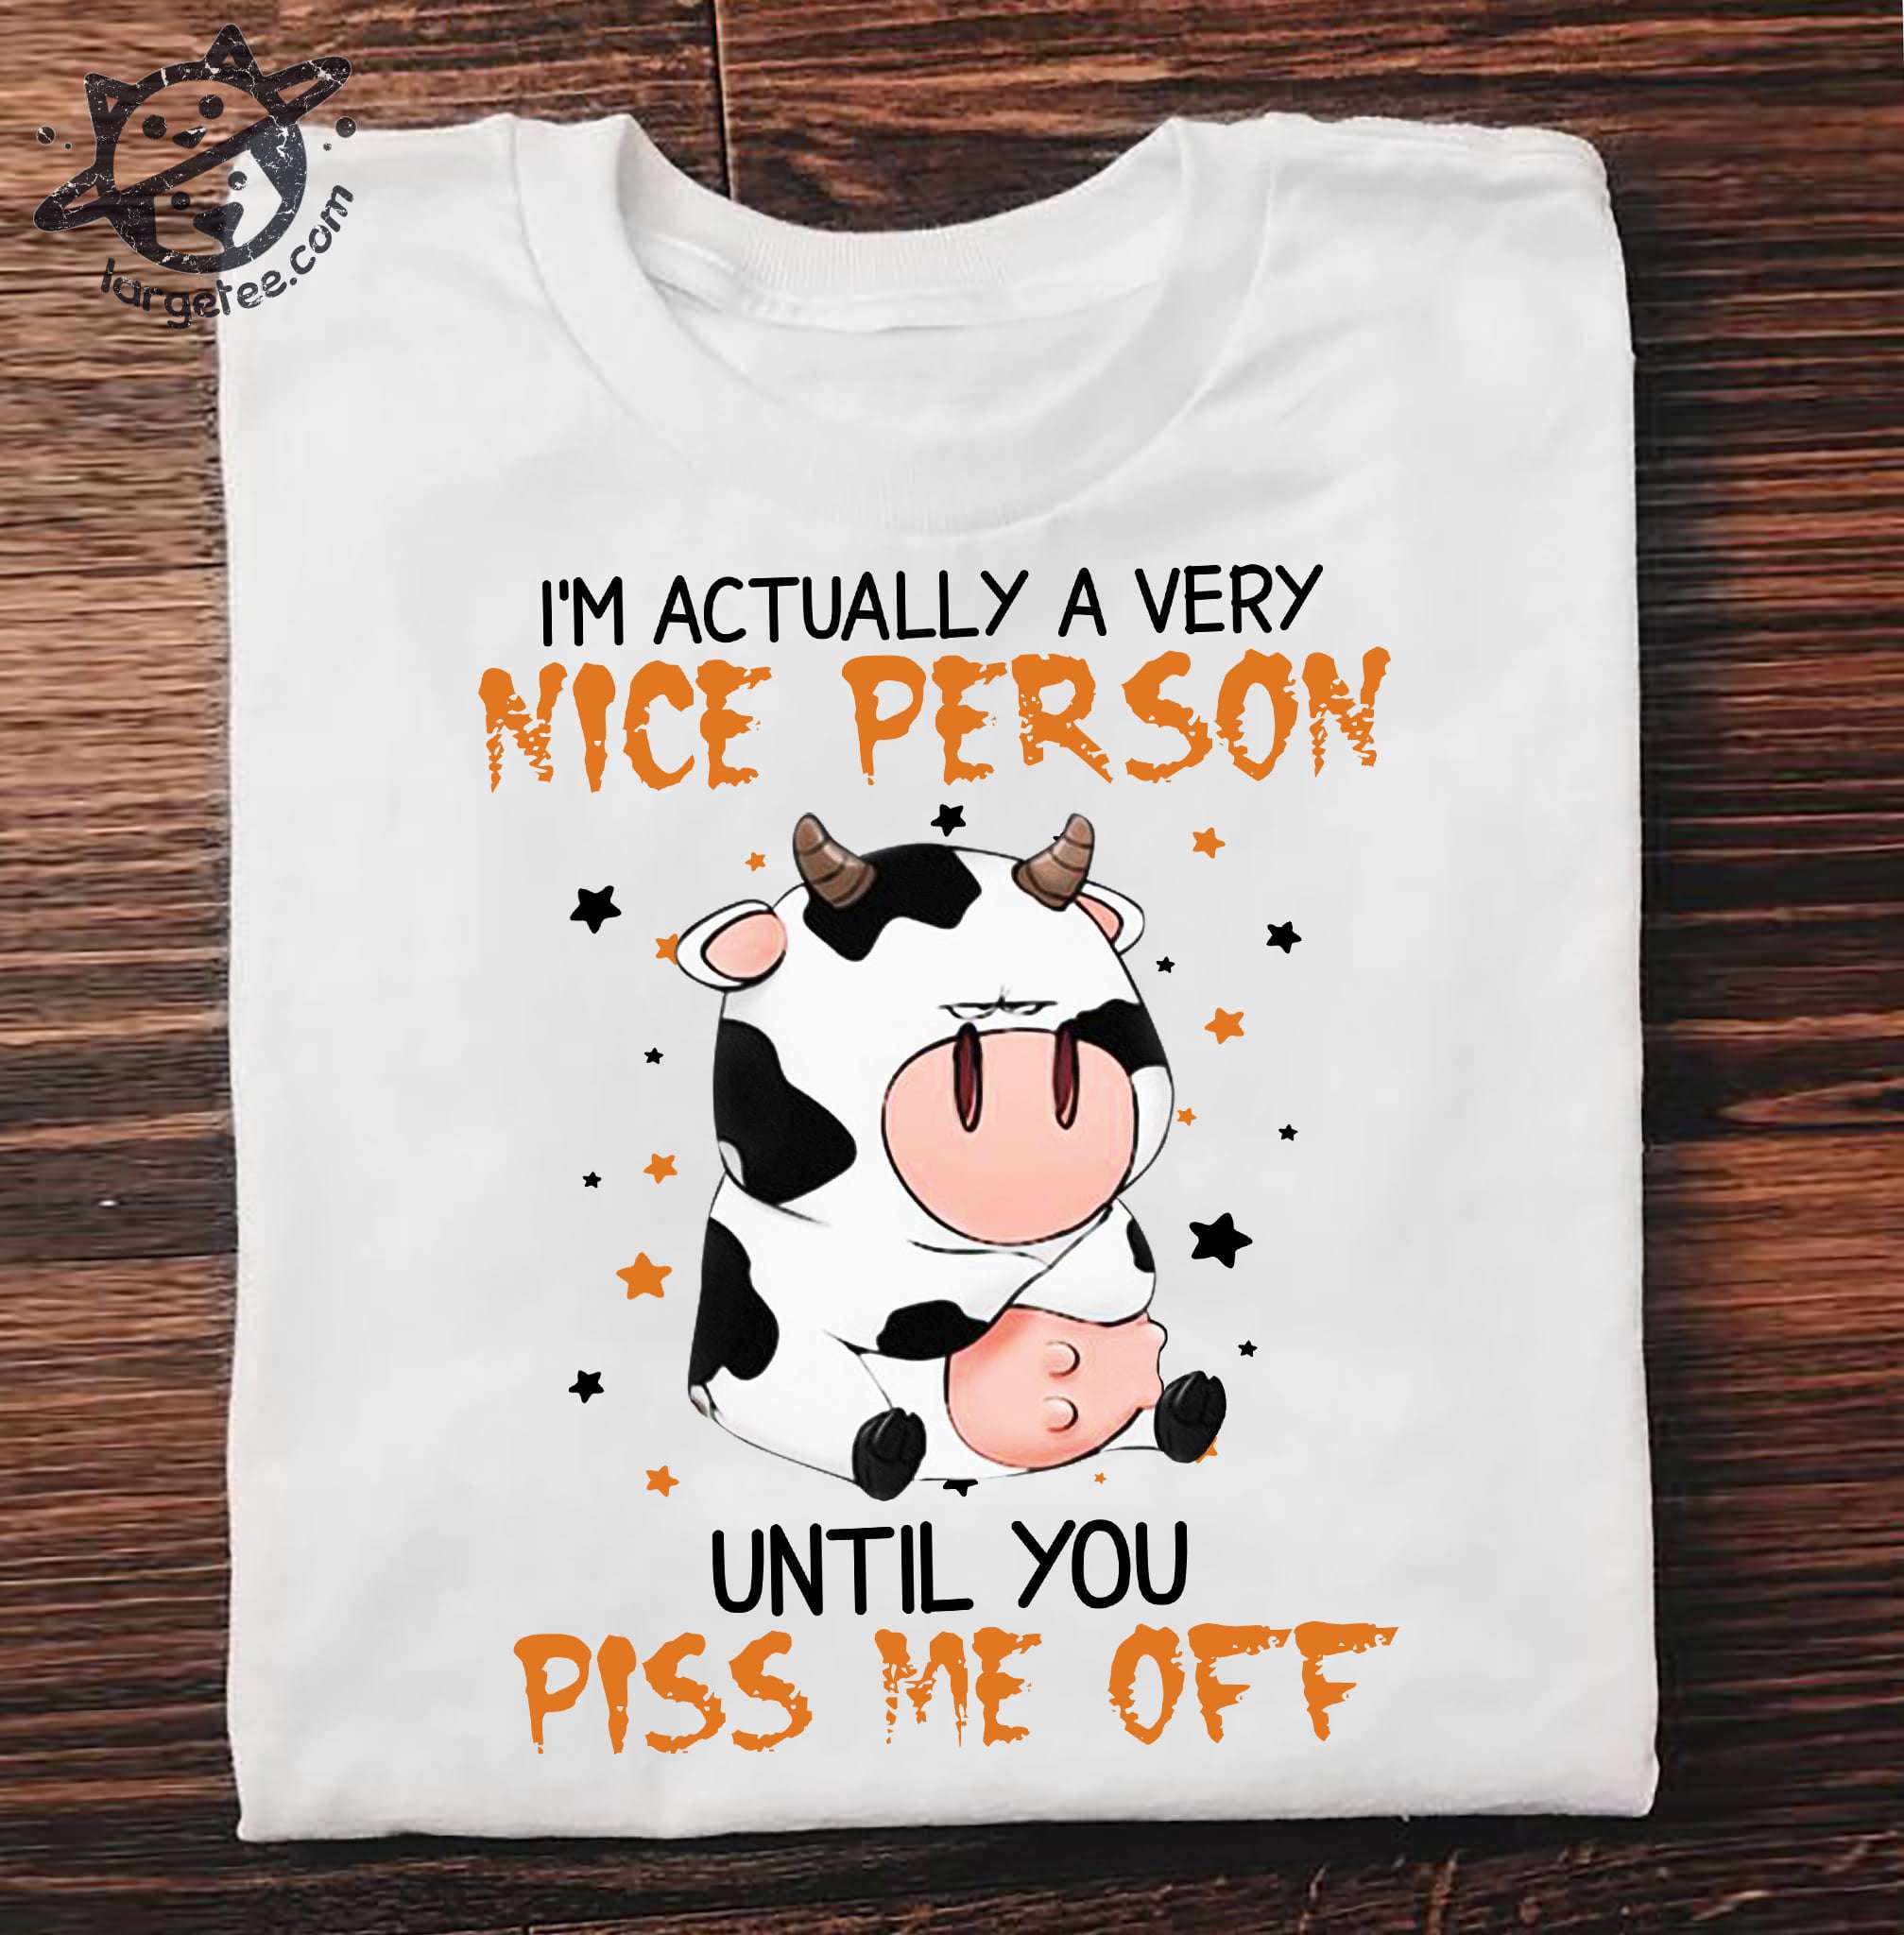 I'm actually a very nice person until you piss me off - Grumpy milk cow